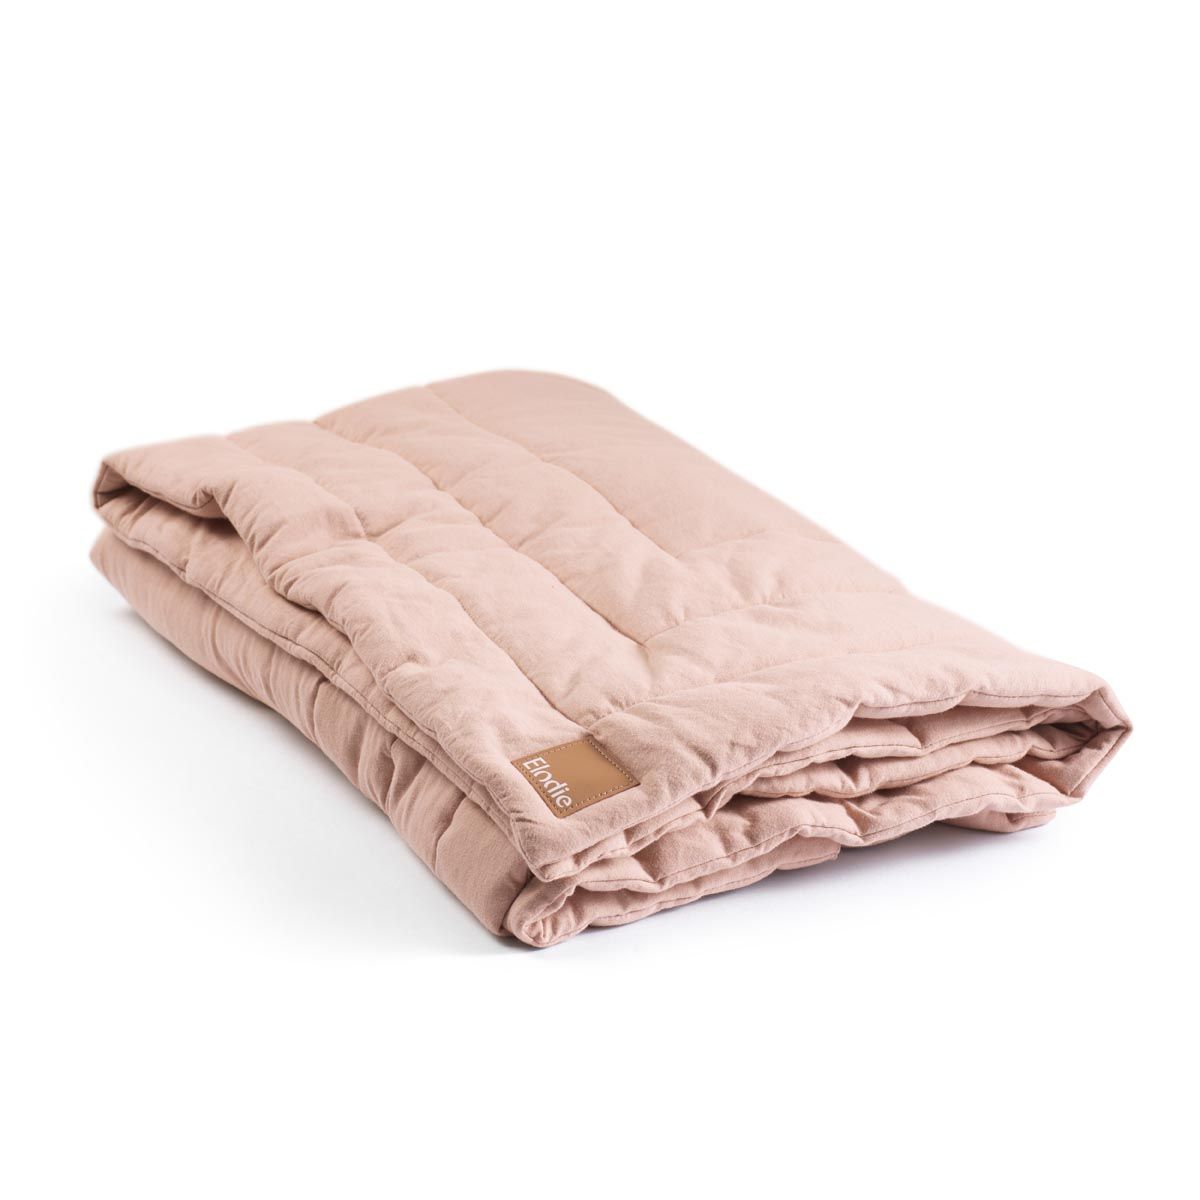 30325102151na-quilted-blanket-blushing-pink-detail2-aw22-pp